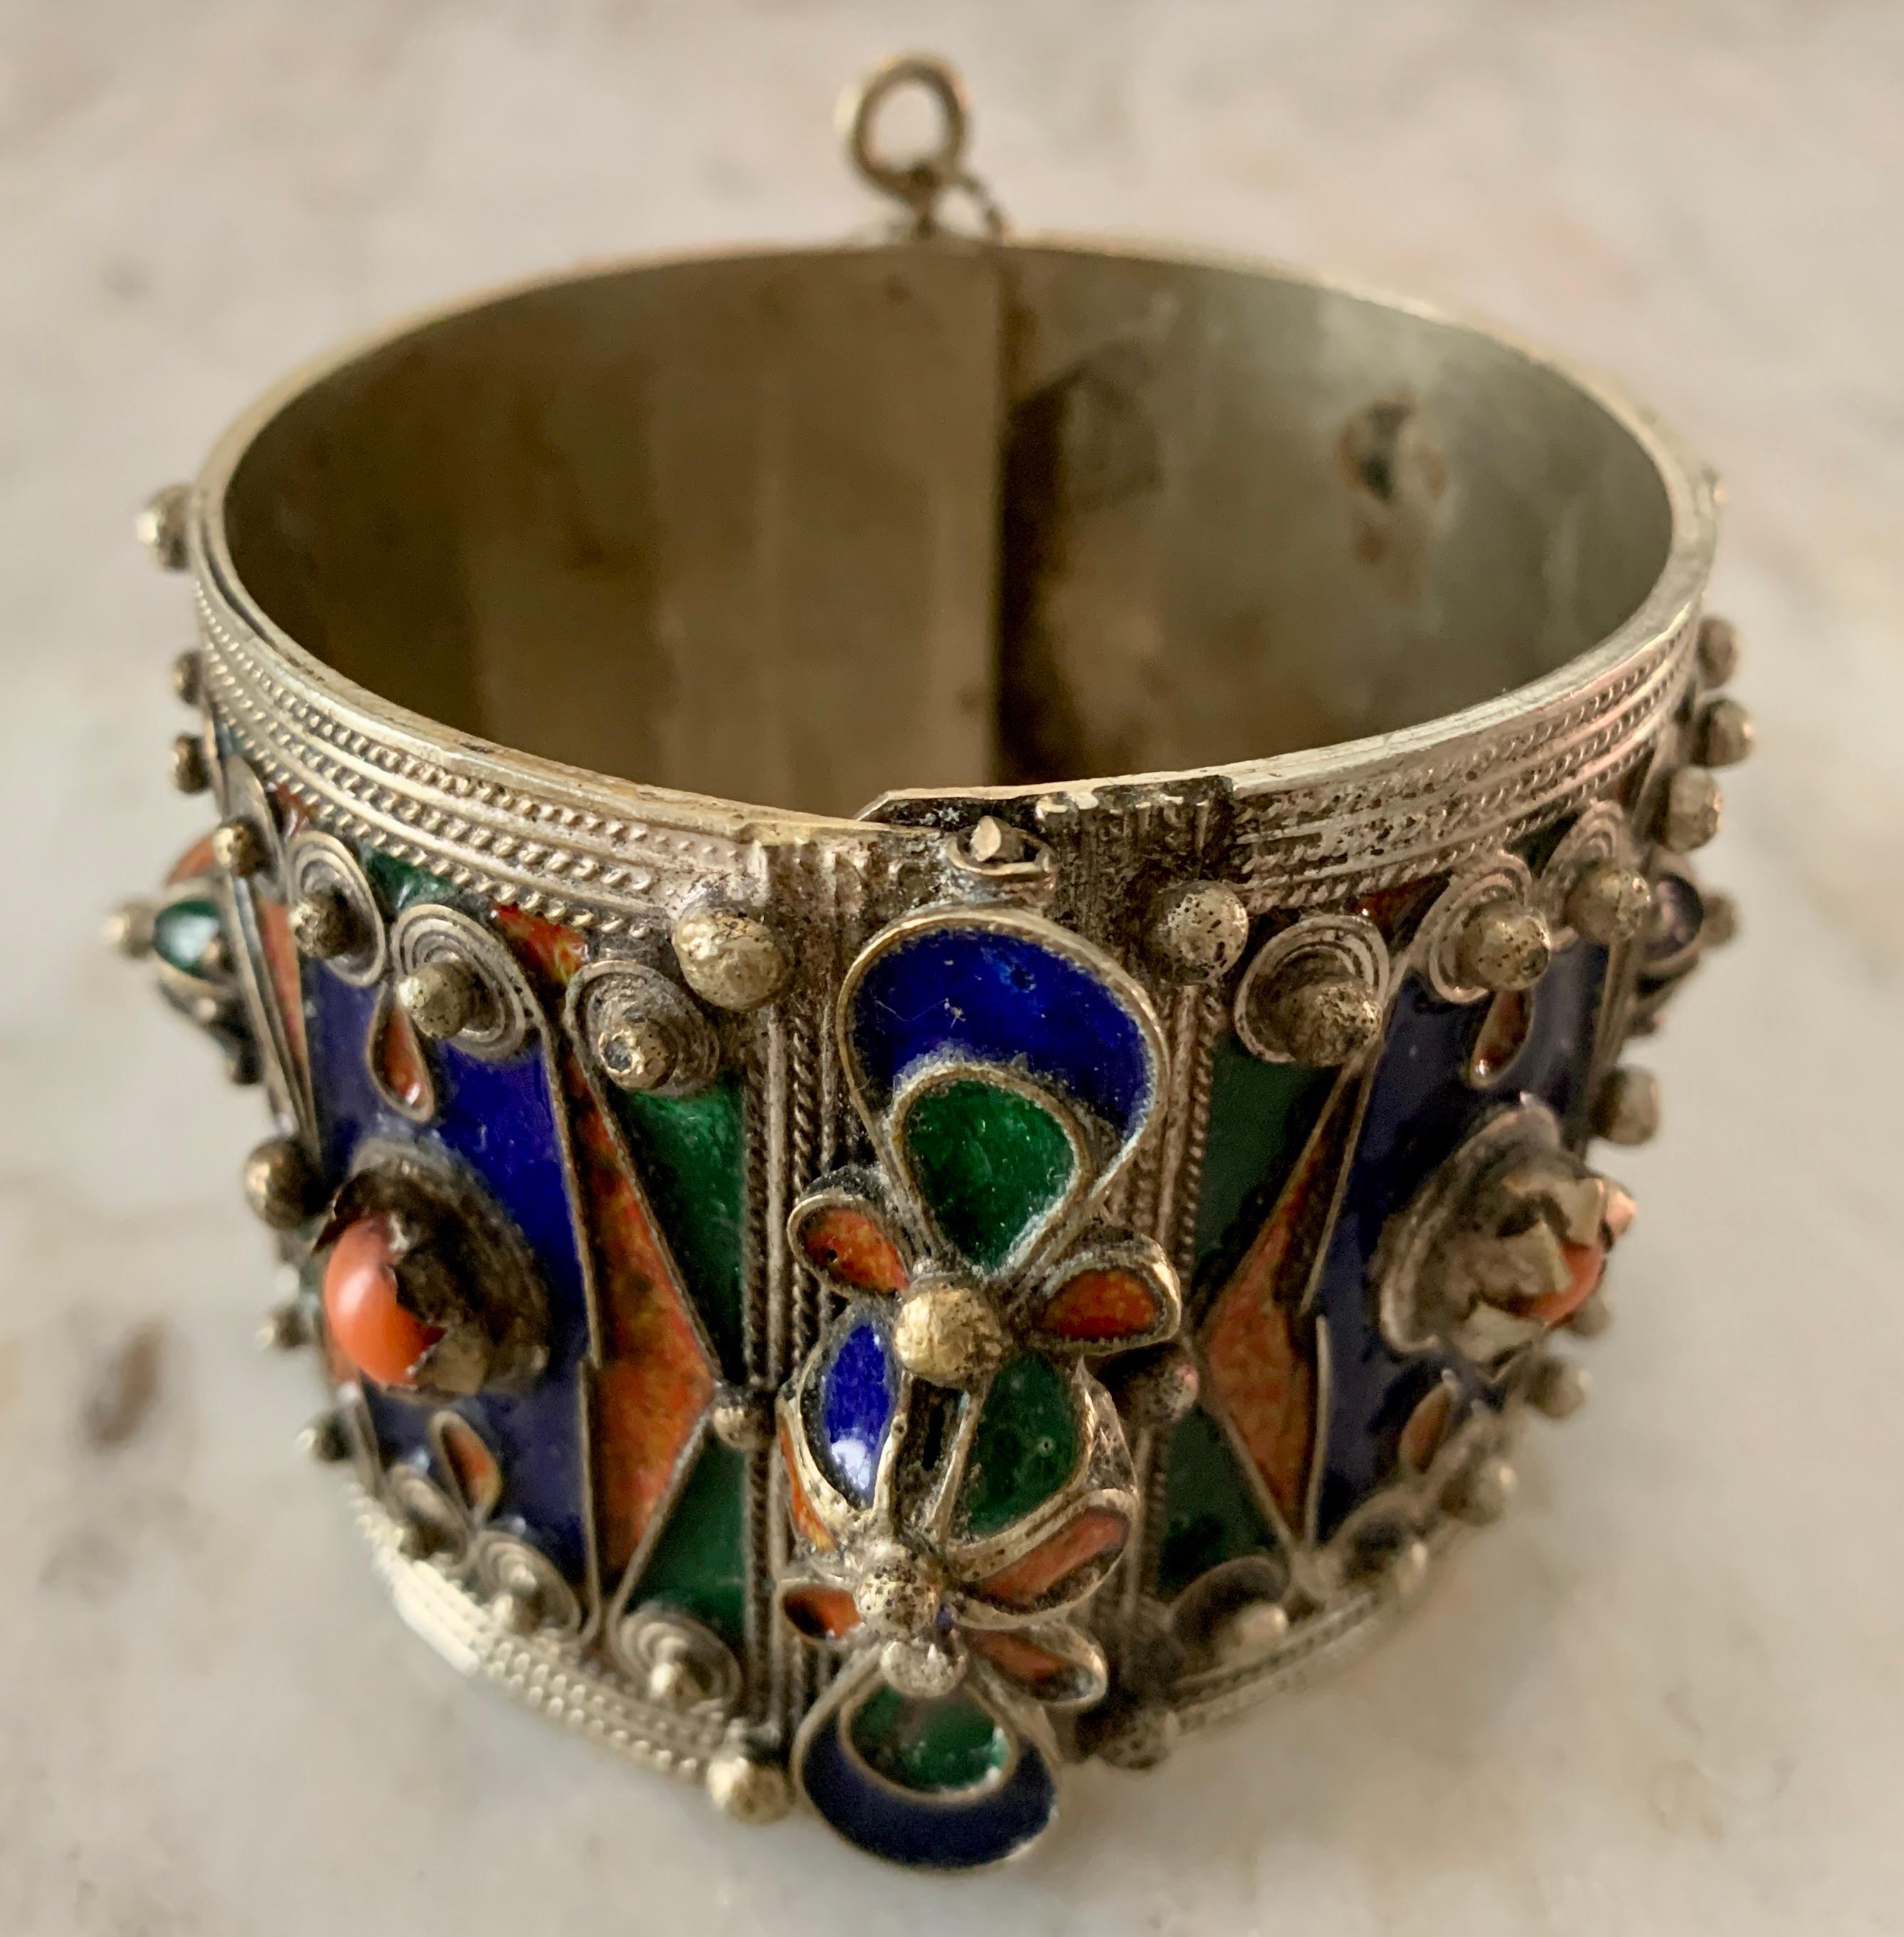 Handmade silver and enamel bracelet cuff - wonderful detailing and colors - a must have for the bohemian styled person - a great stand alone piece or with added bangles.